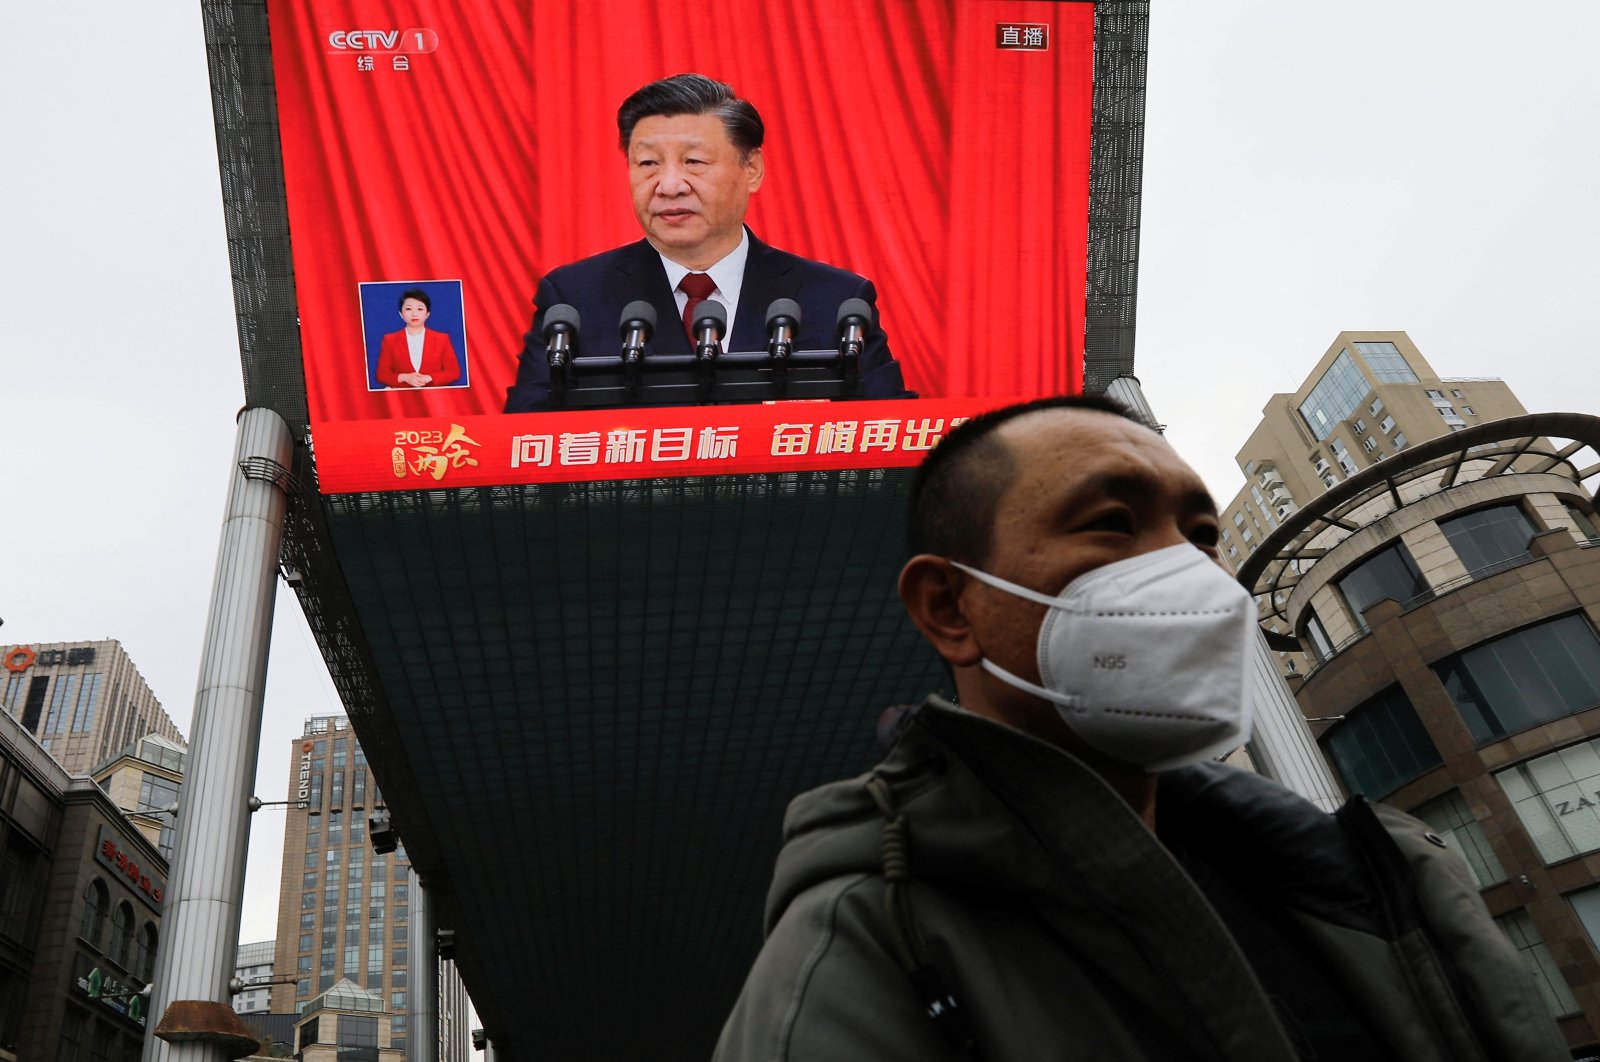 A giant screen displays a live broadcast of Chinese President Xi Jinping delivering a speech at the National People’s Congress (NPC), Beijing, China, March 13, 2023. (Reuters Photo)